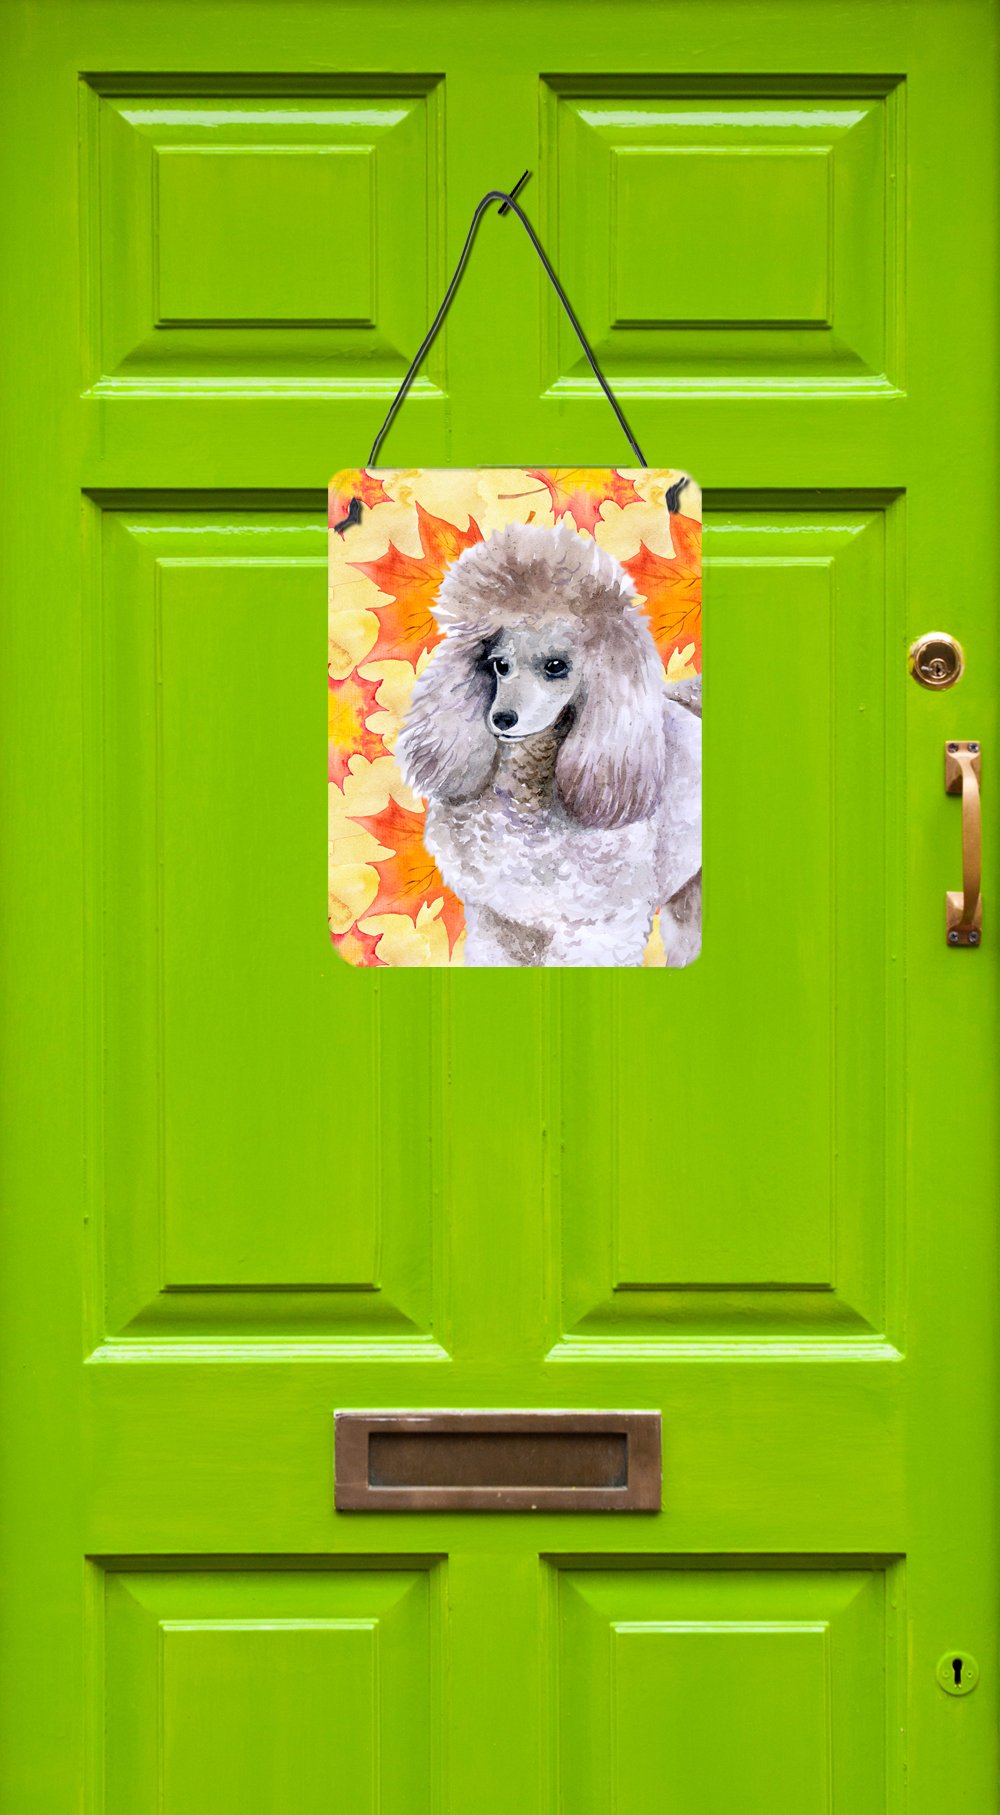 Poodle Fall Wall or Door Hanging Prints BB9926DS1216 by Caroline's Treasures